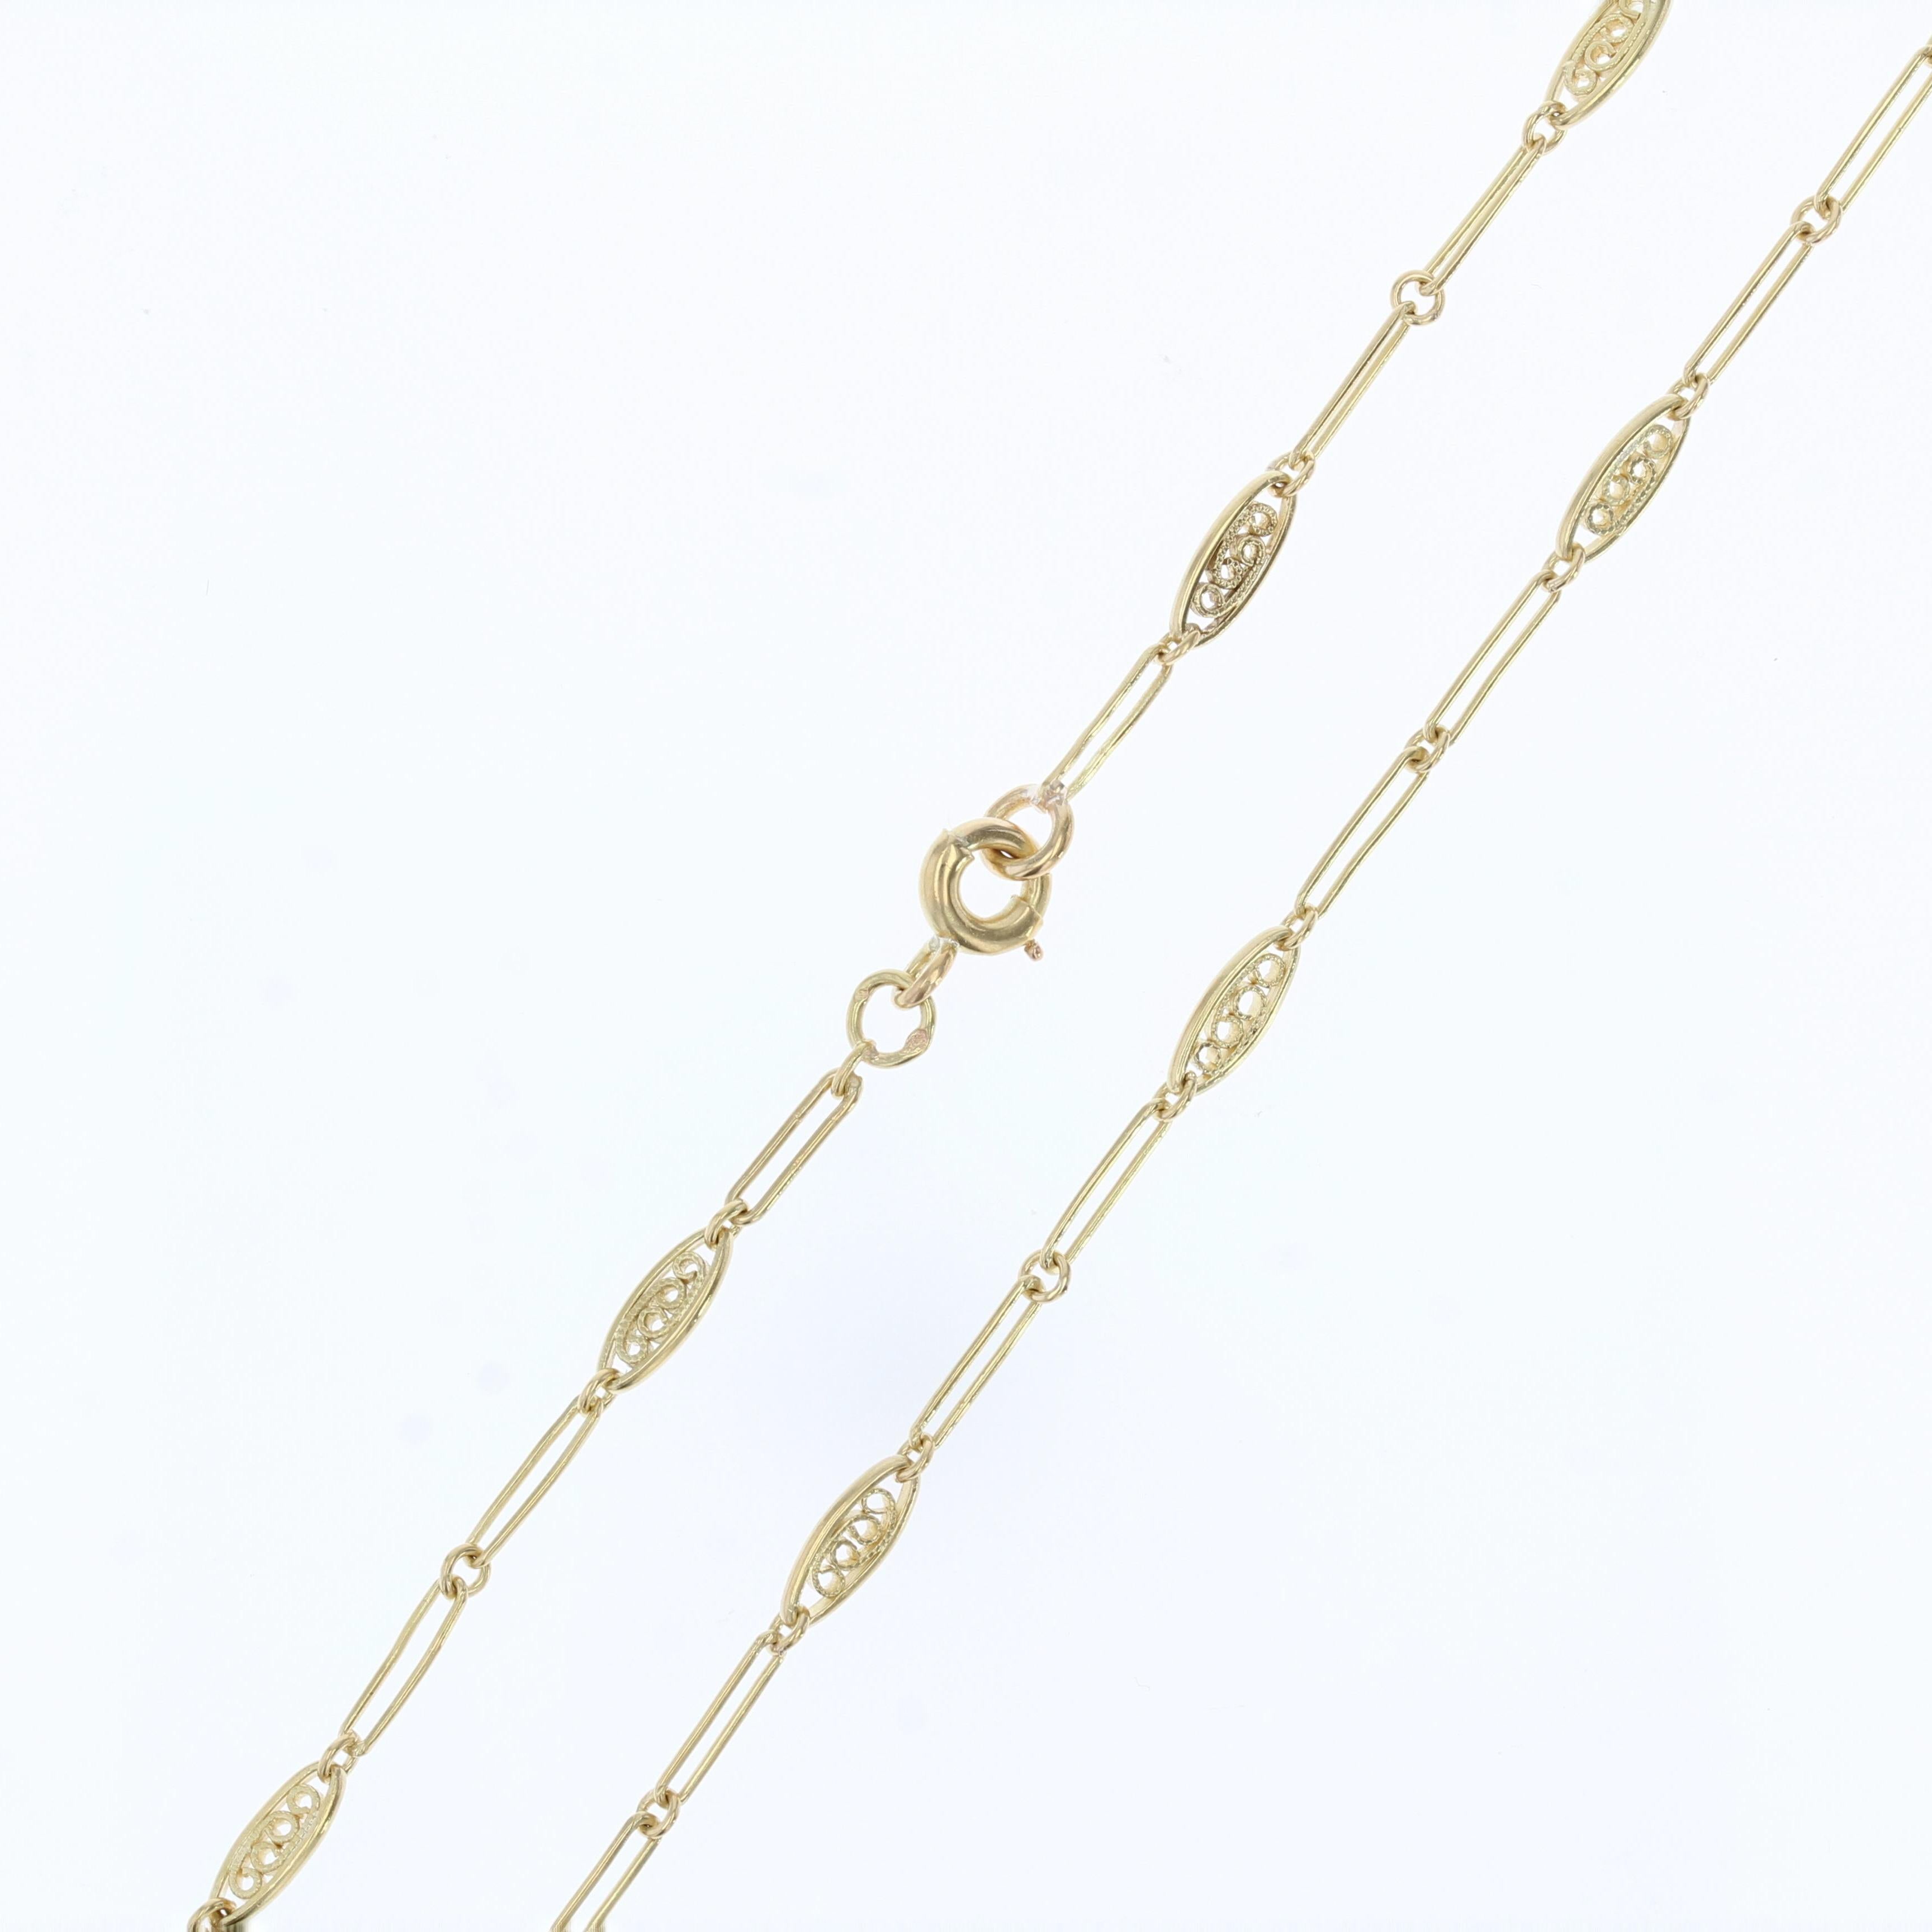 French 1900s 18 Karat Yellow Gold Filigree Chain For Sale 1